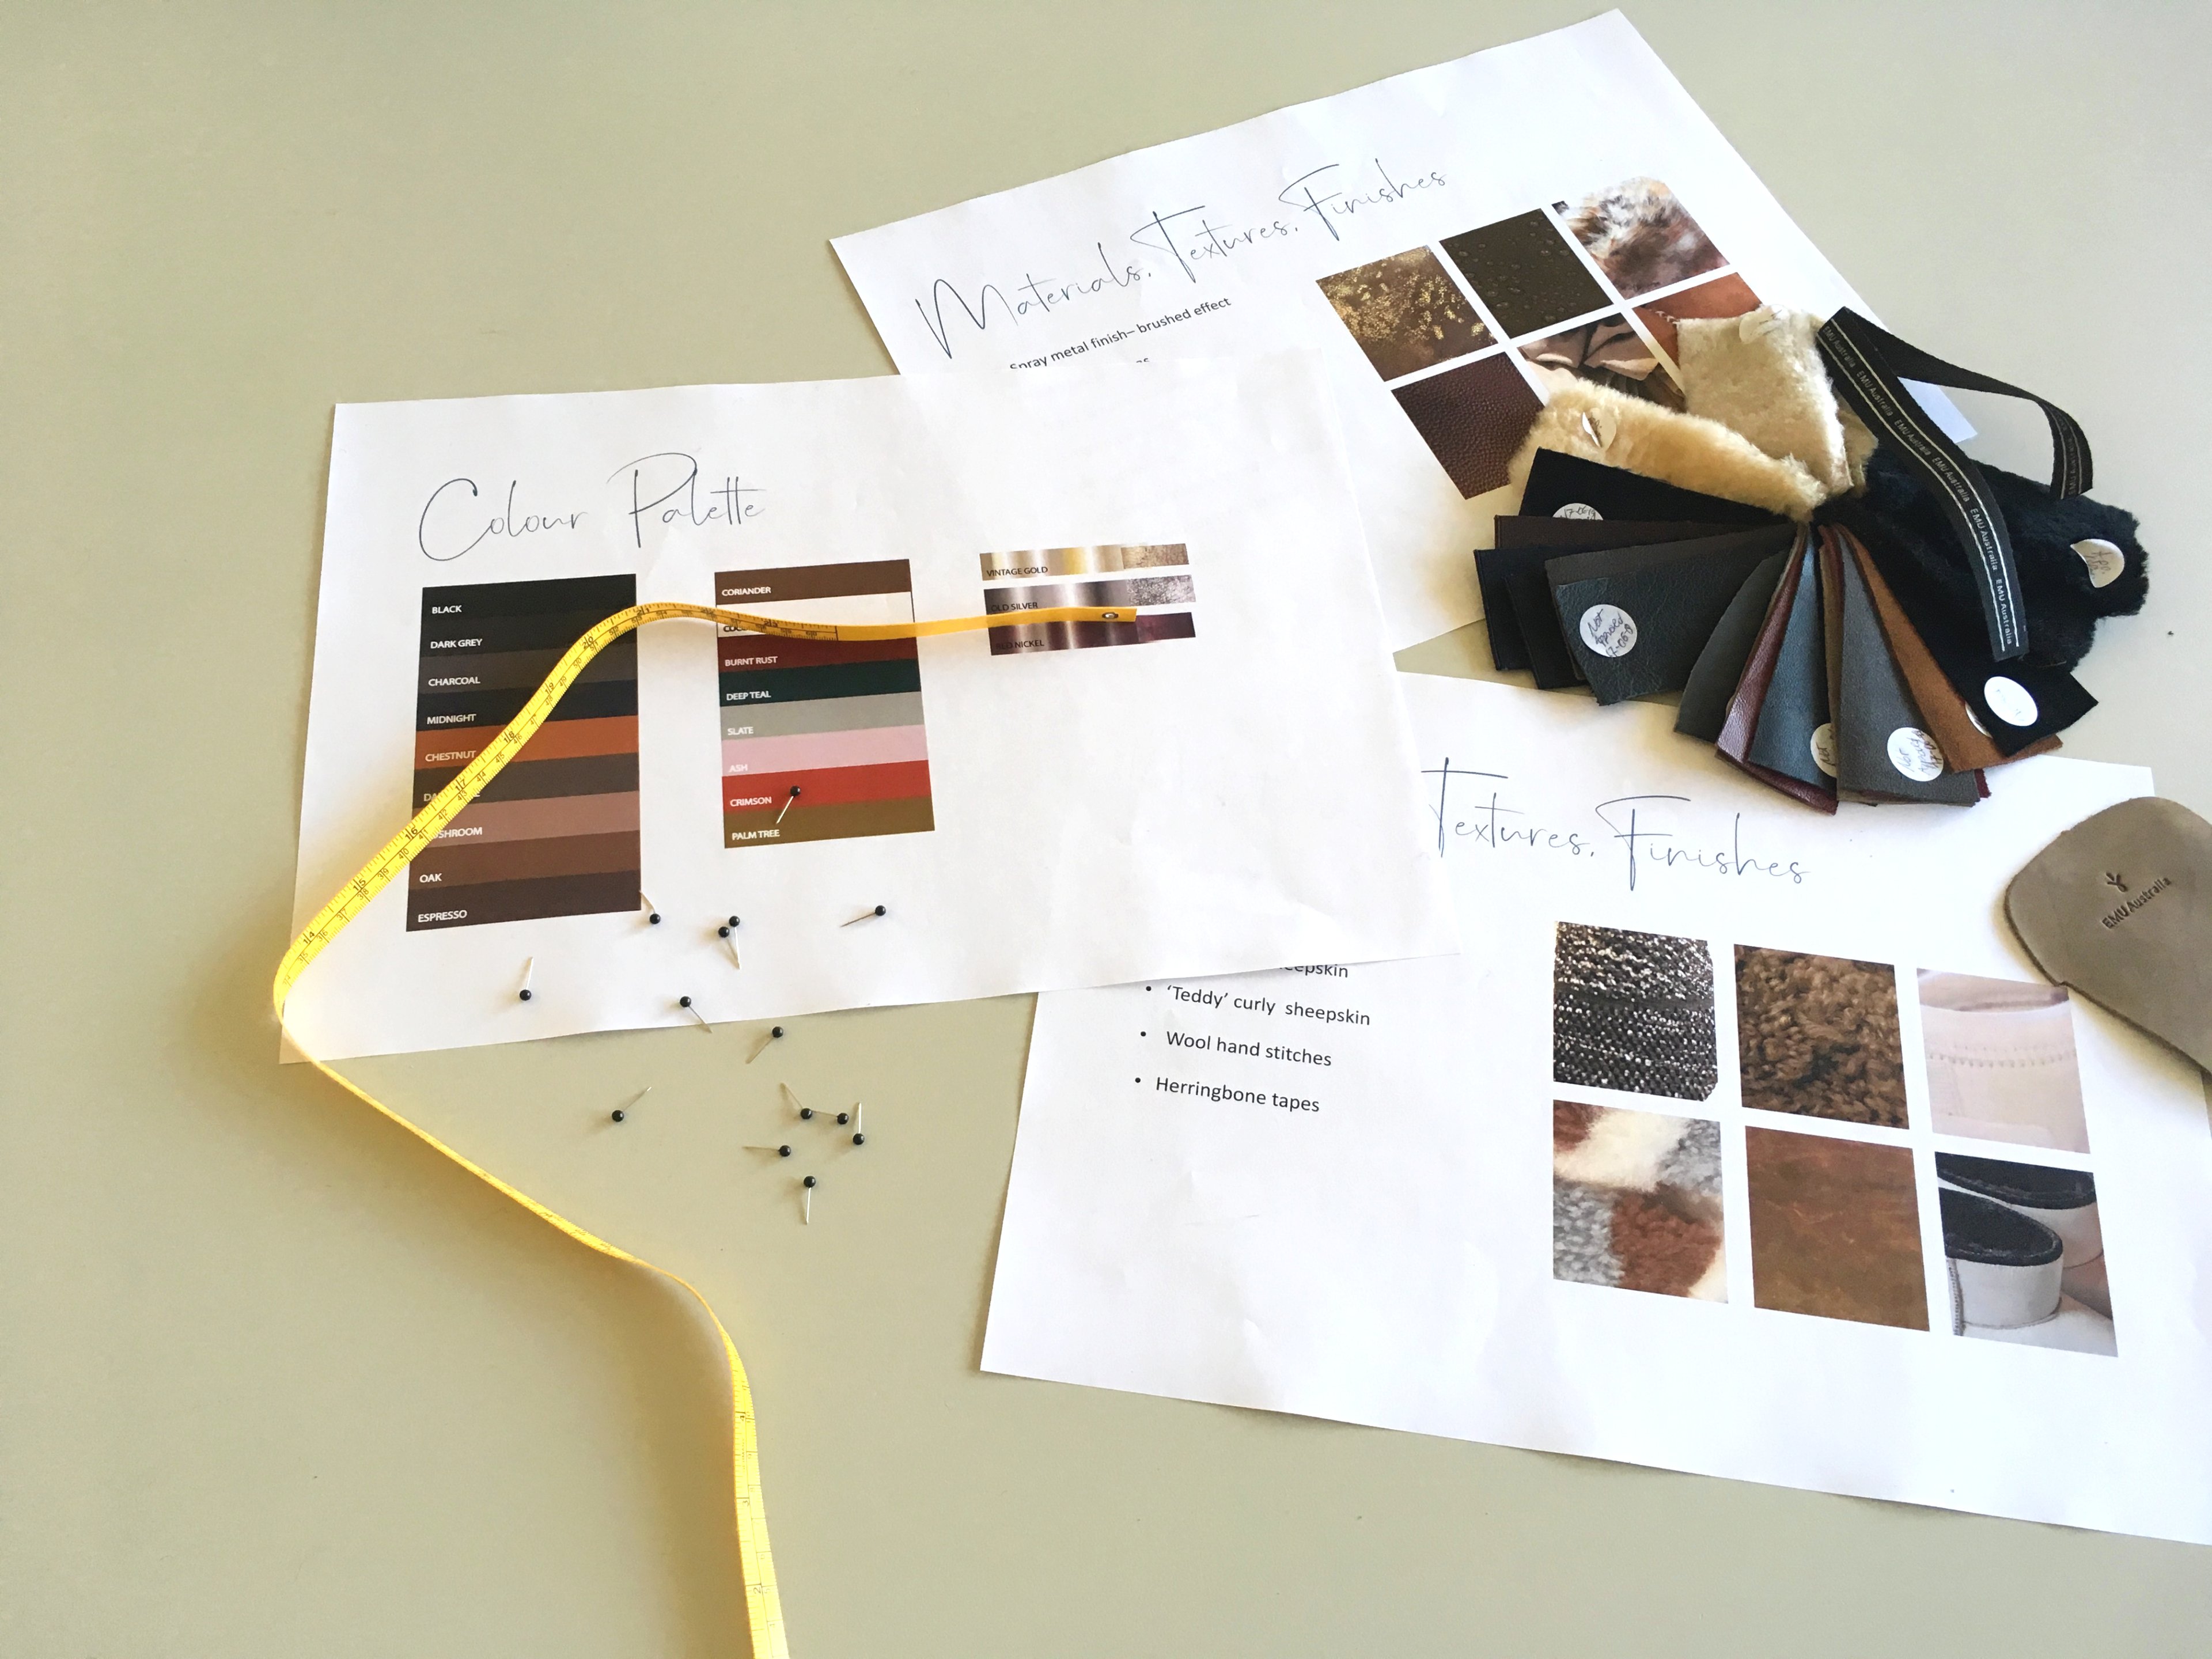 Pieces of paper with design notes, measuring tape, pins, swatches of material sitting on table